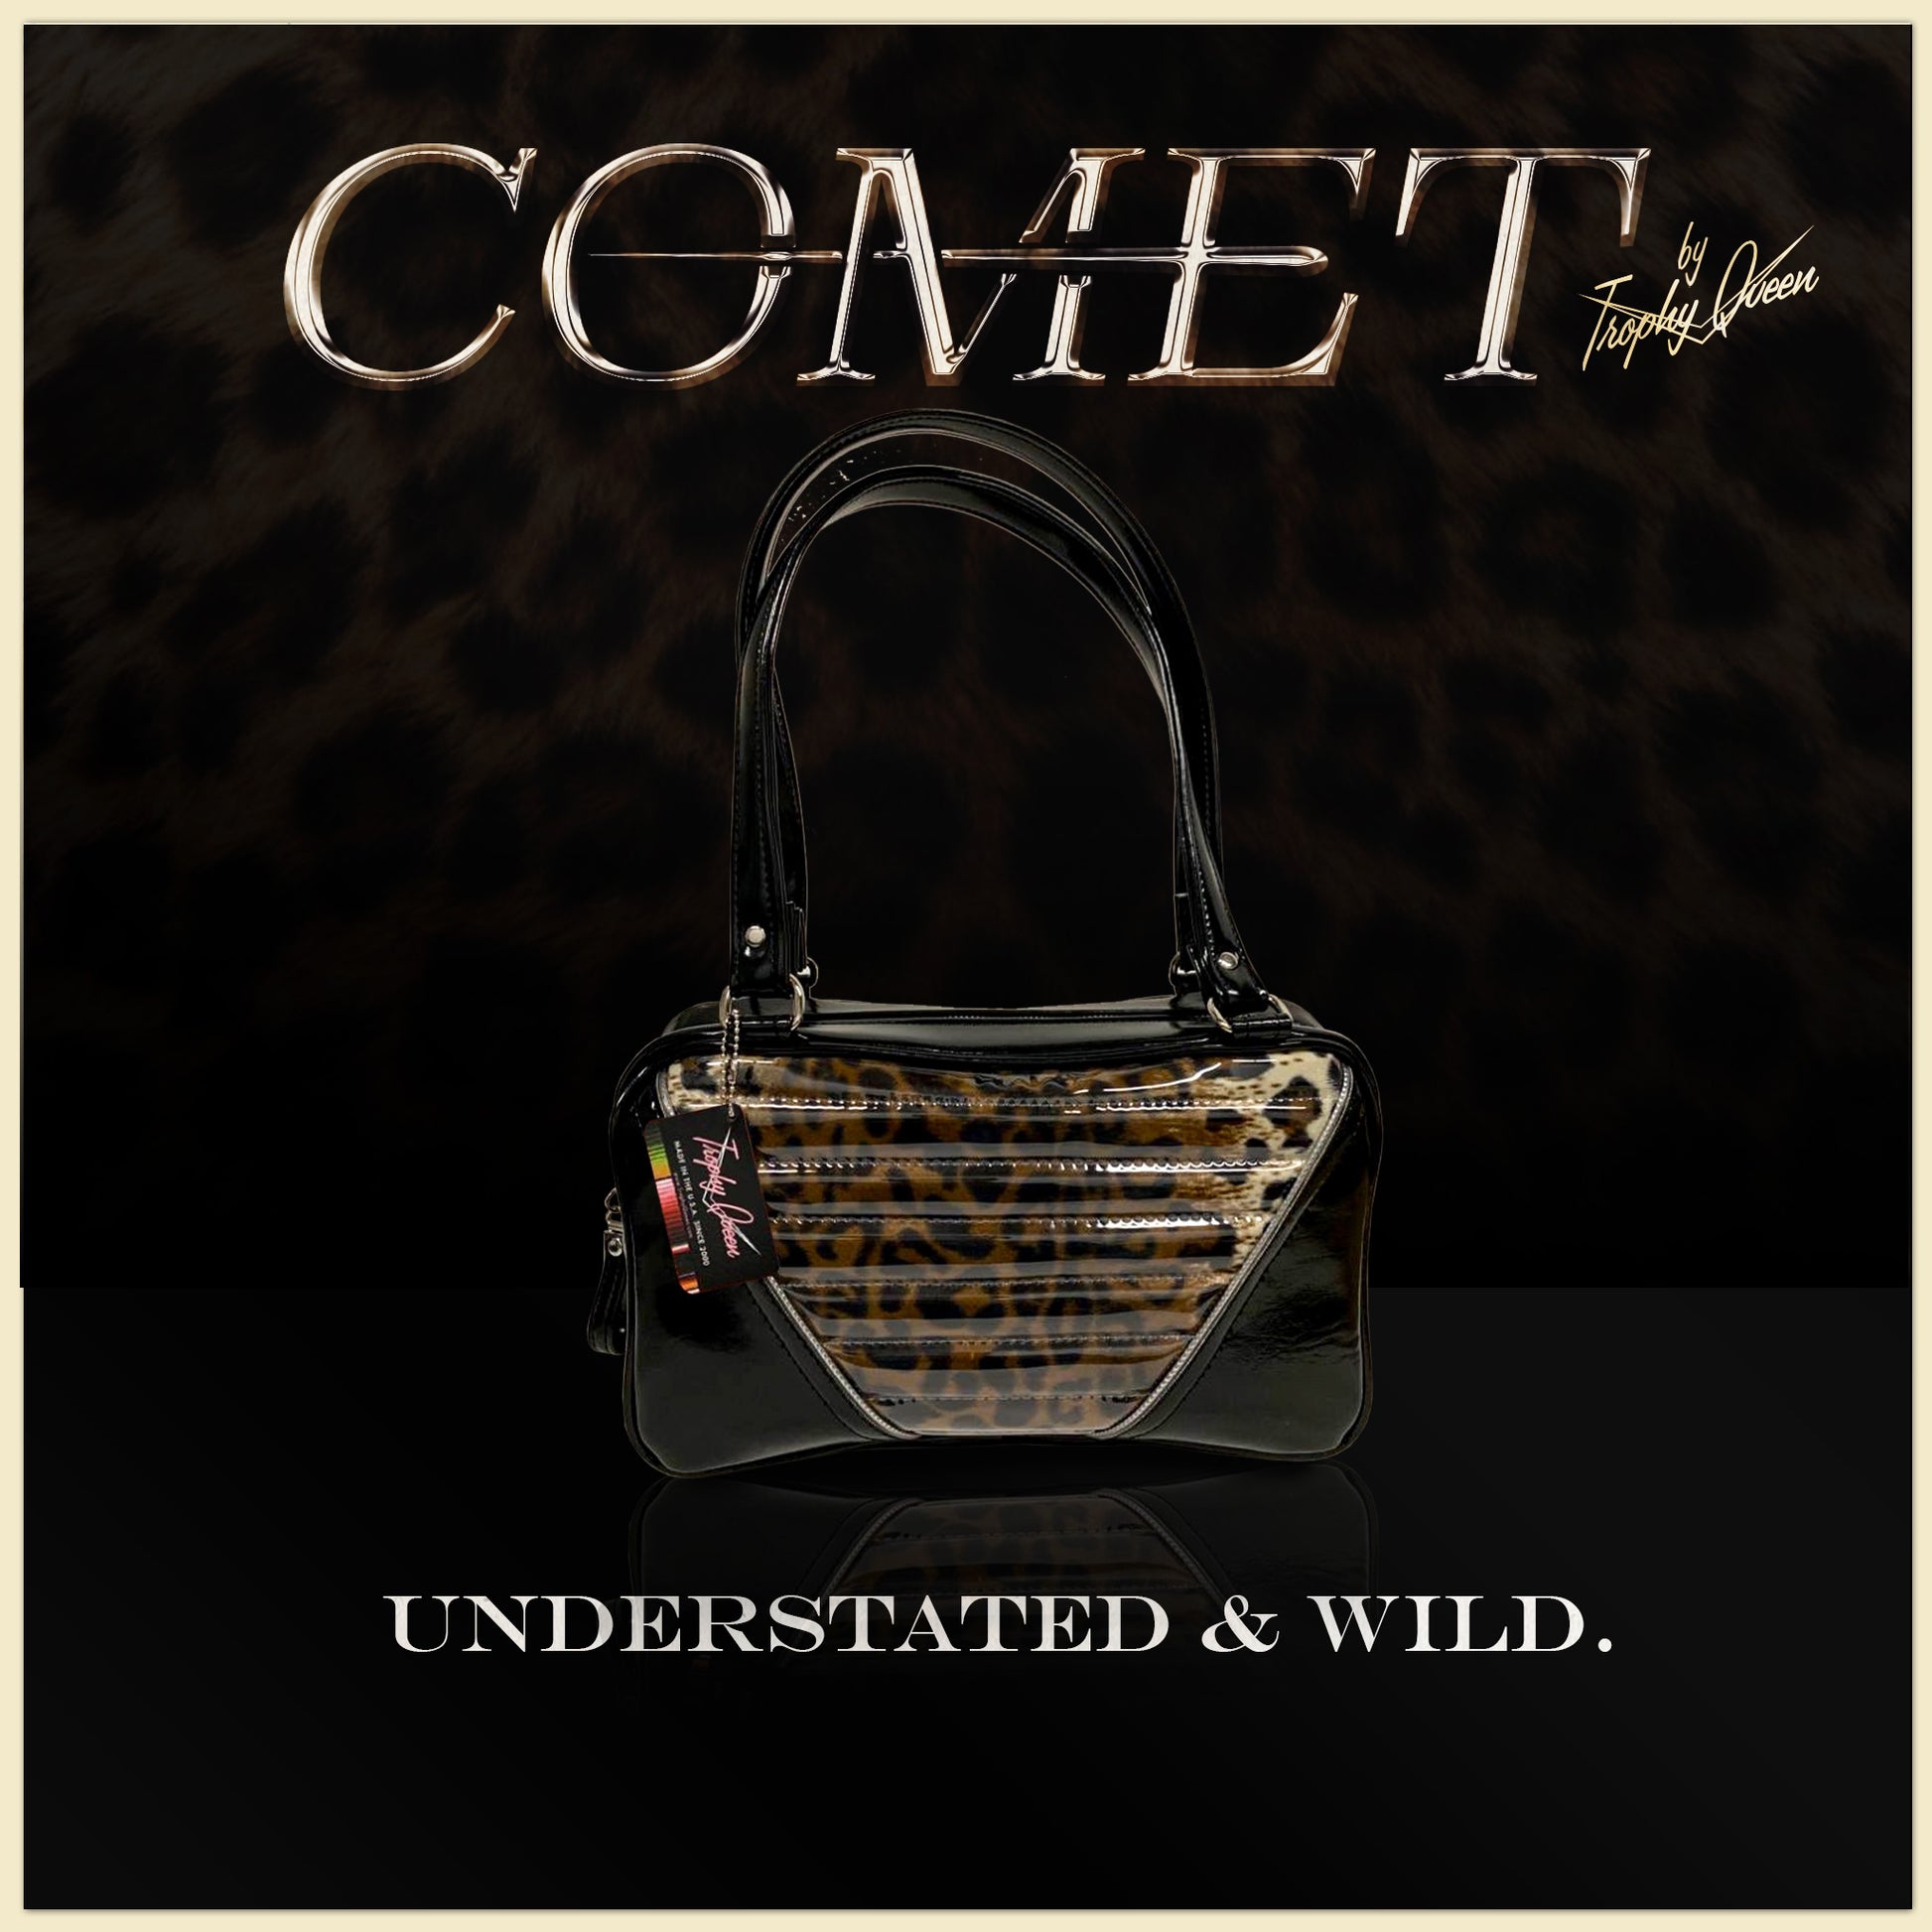 Comet Features: Handcrafted in California Dimensions: 13" x 6" x 4" 21" Straps (Approx.) with Nickel Hardware Comes with an Extra Set of Replacement Straps! Inside Zipper Pocket (With Serial Number Inside) Inside Open Divided Pocket Inside Trophy Queen Label Vinyl Zipper Pull Nickel Feet Ships from California Made to Order - Please Allow 3-4 Weeks to Ship